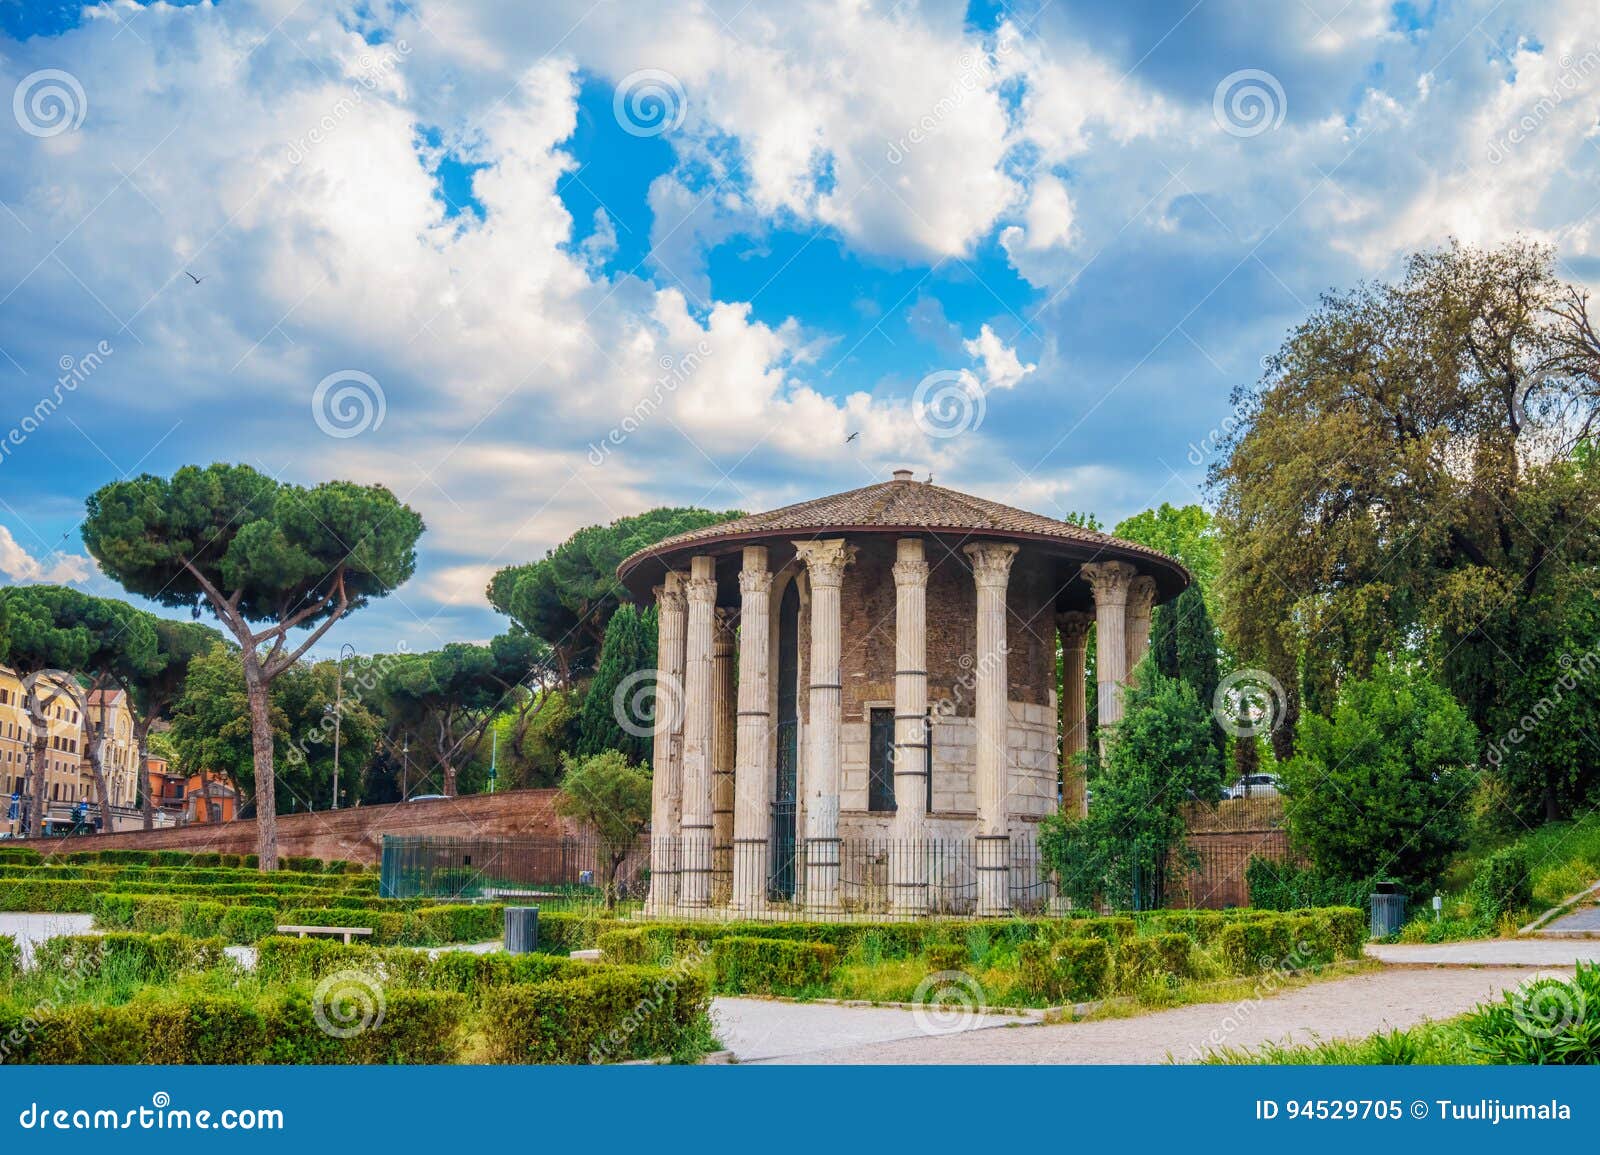 the temple of hercules victor in rome